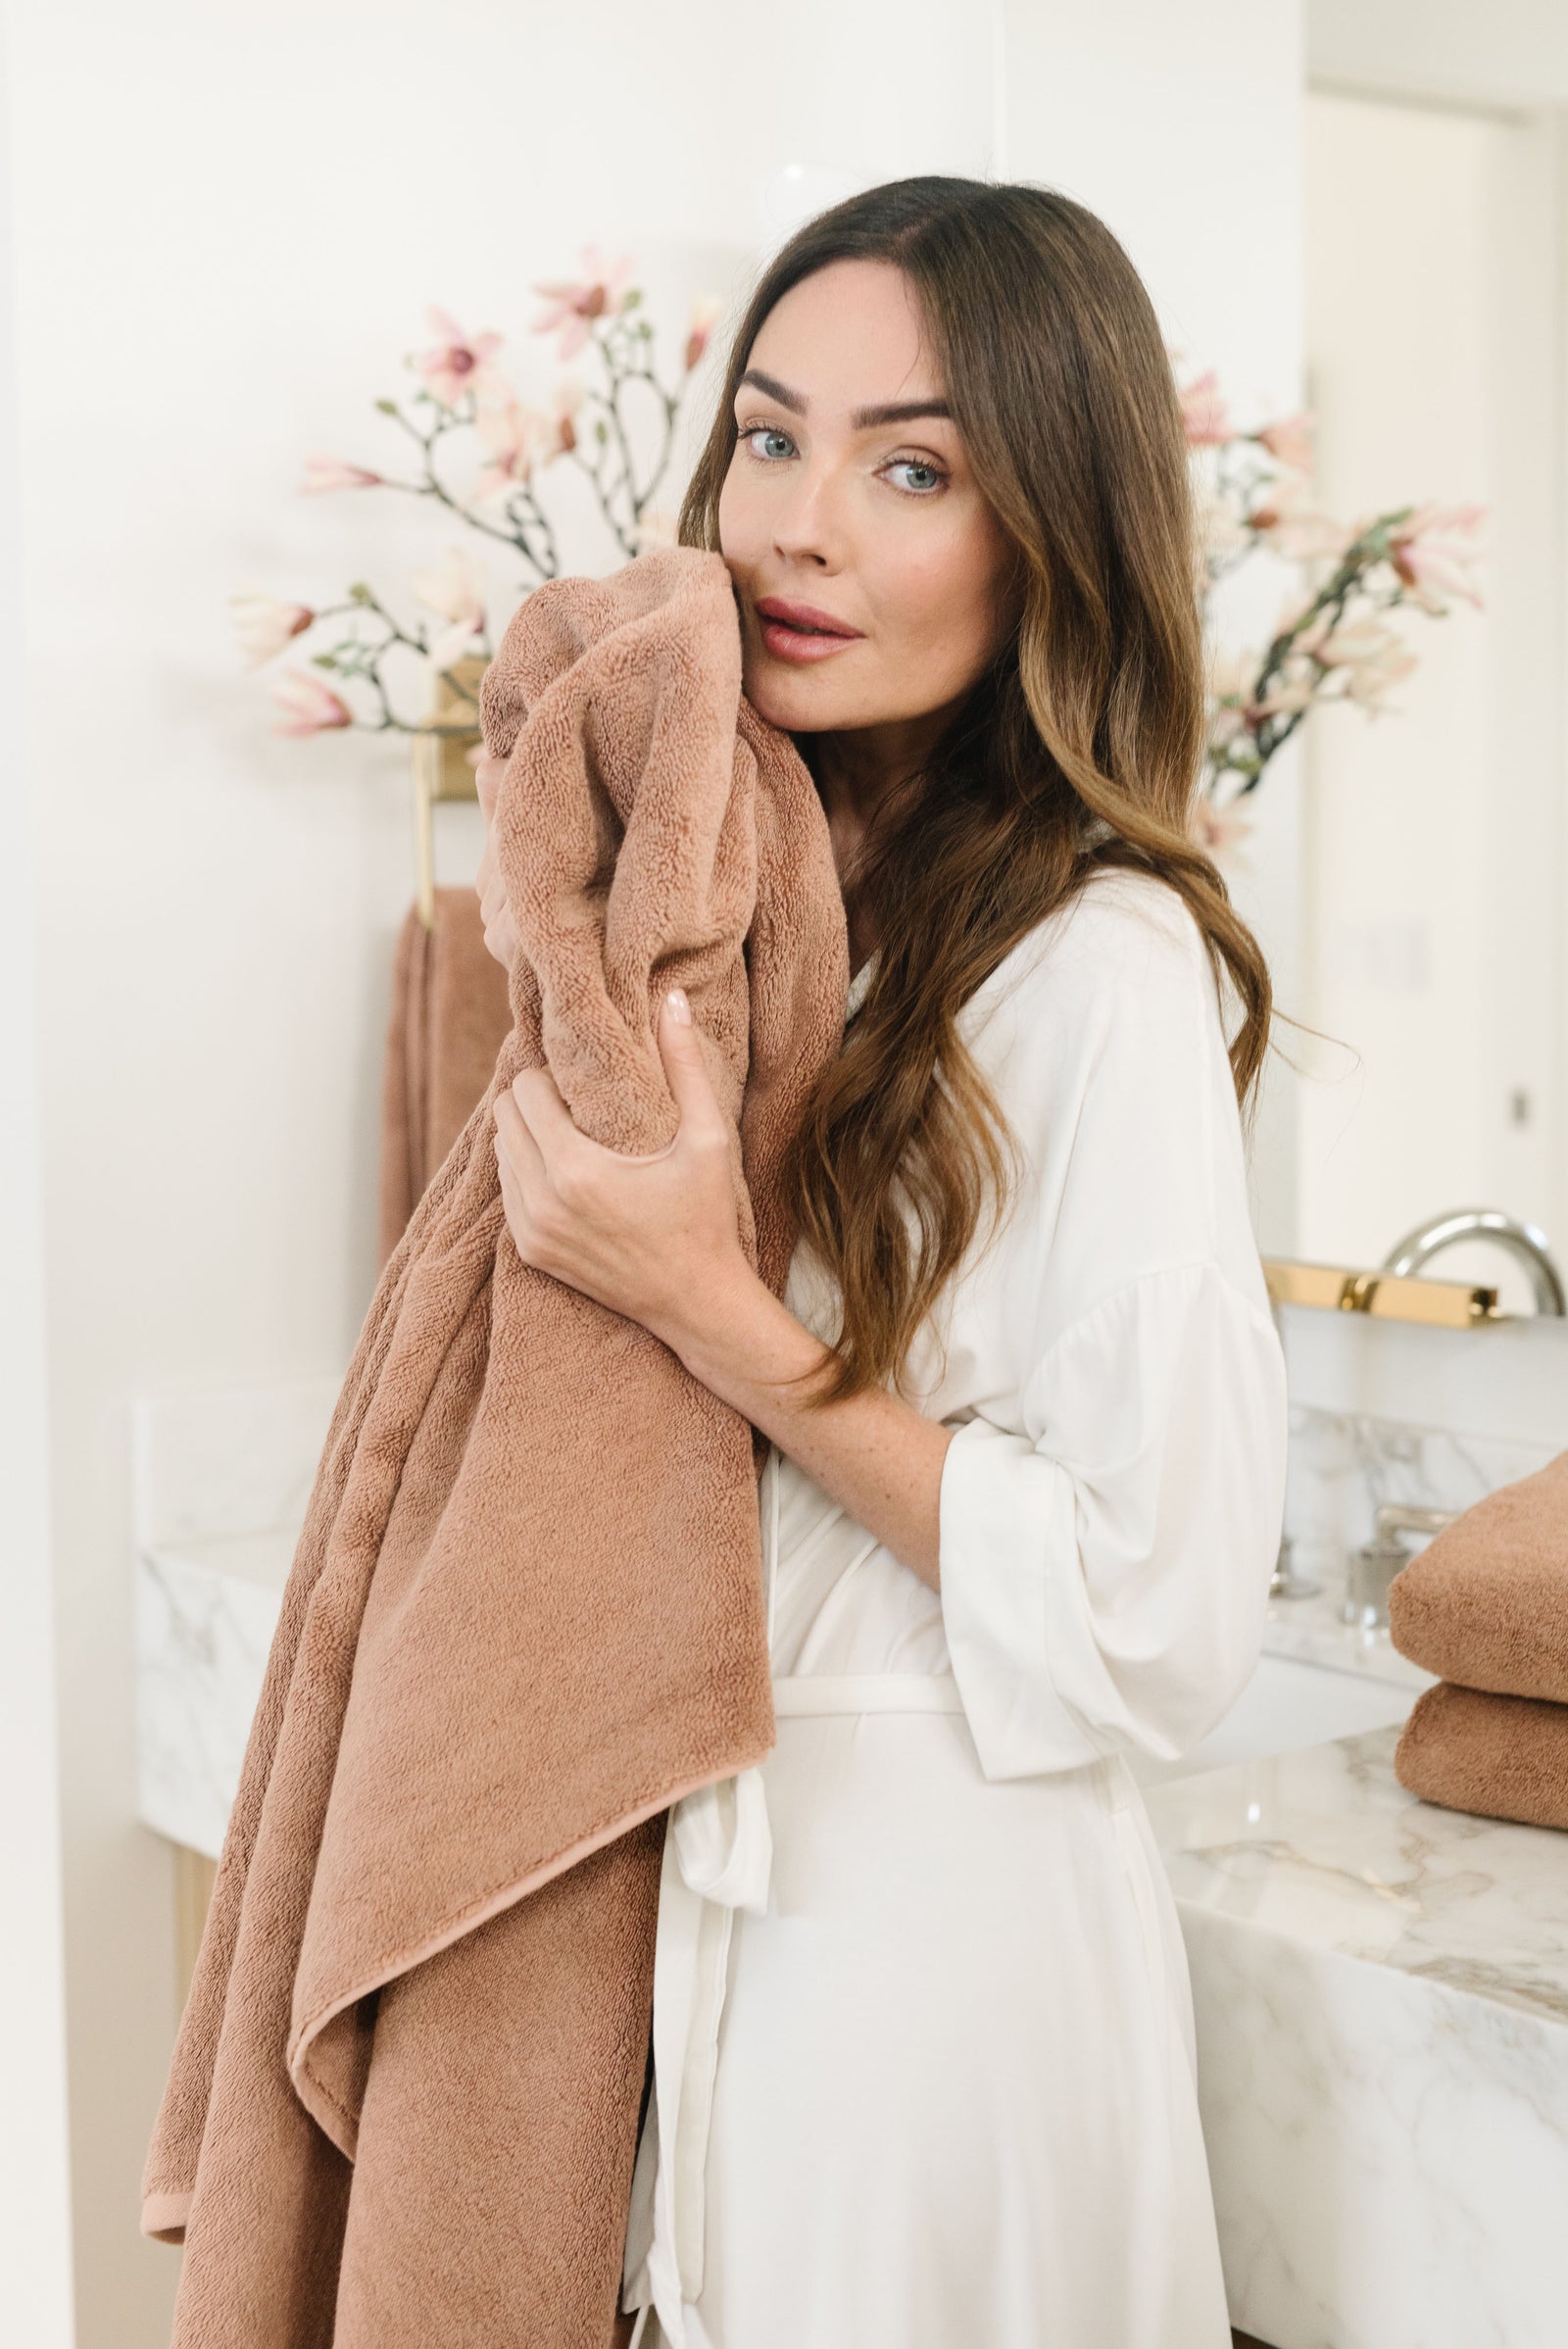 Premium Plush Bath Towel in the color Clay. Photo of Clay Premium Plush Bath Towel taken with a brunette woman holding the towel close to her body in a bathroom. 